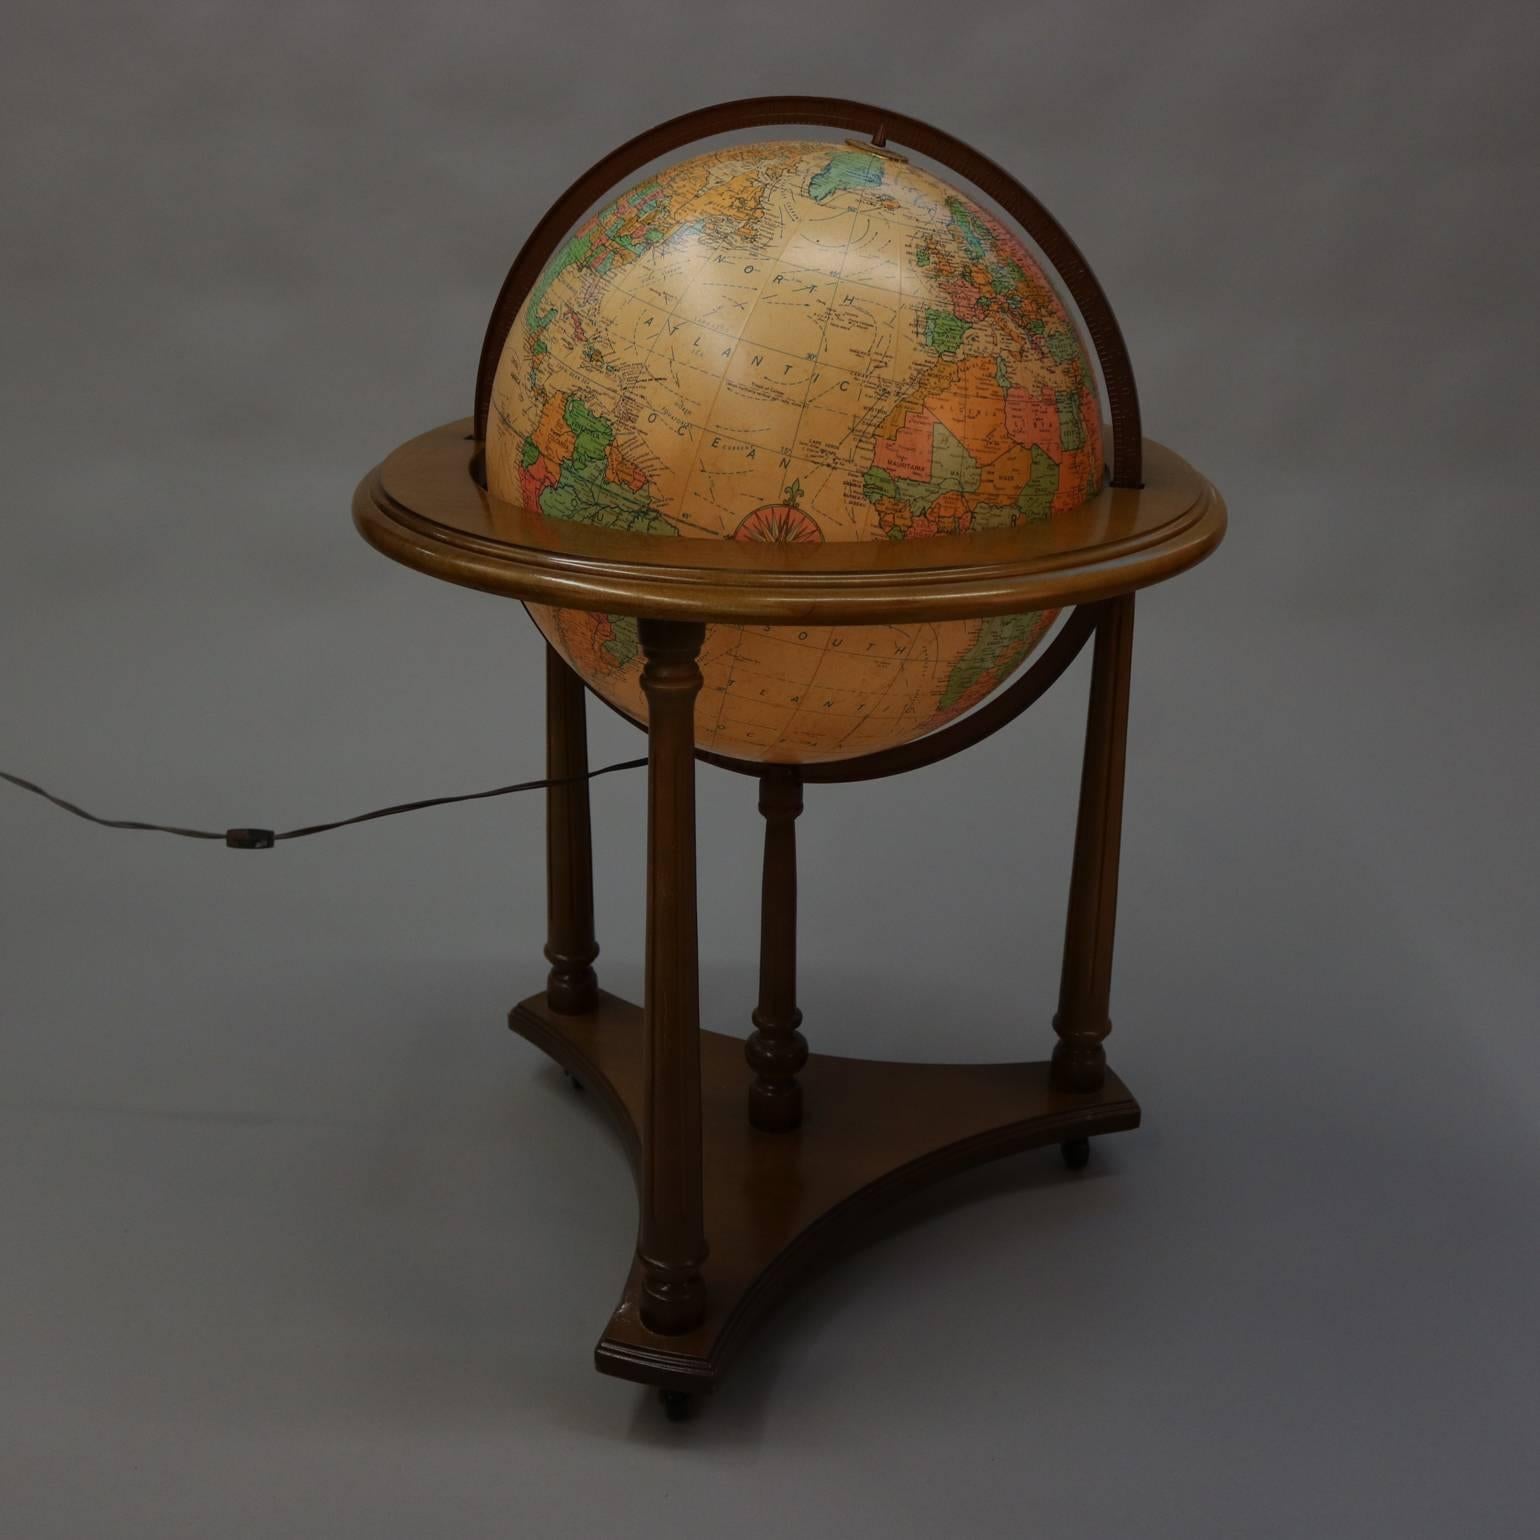 Vintage lighted Heirloom Globe library world globe by Replogle on mahogany tripod floor stand, 20th century.

Measures: 35" H x 21" diameter.